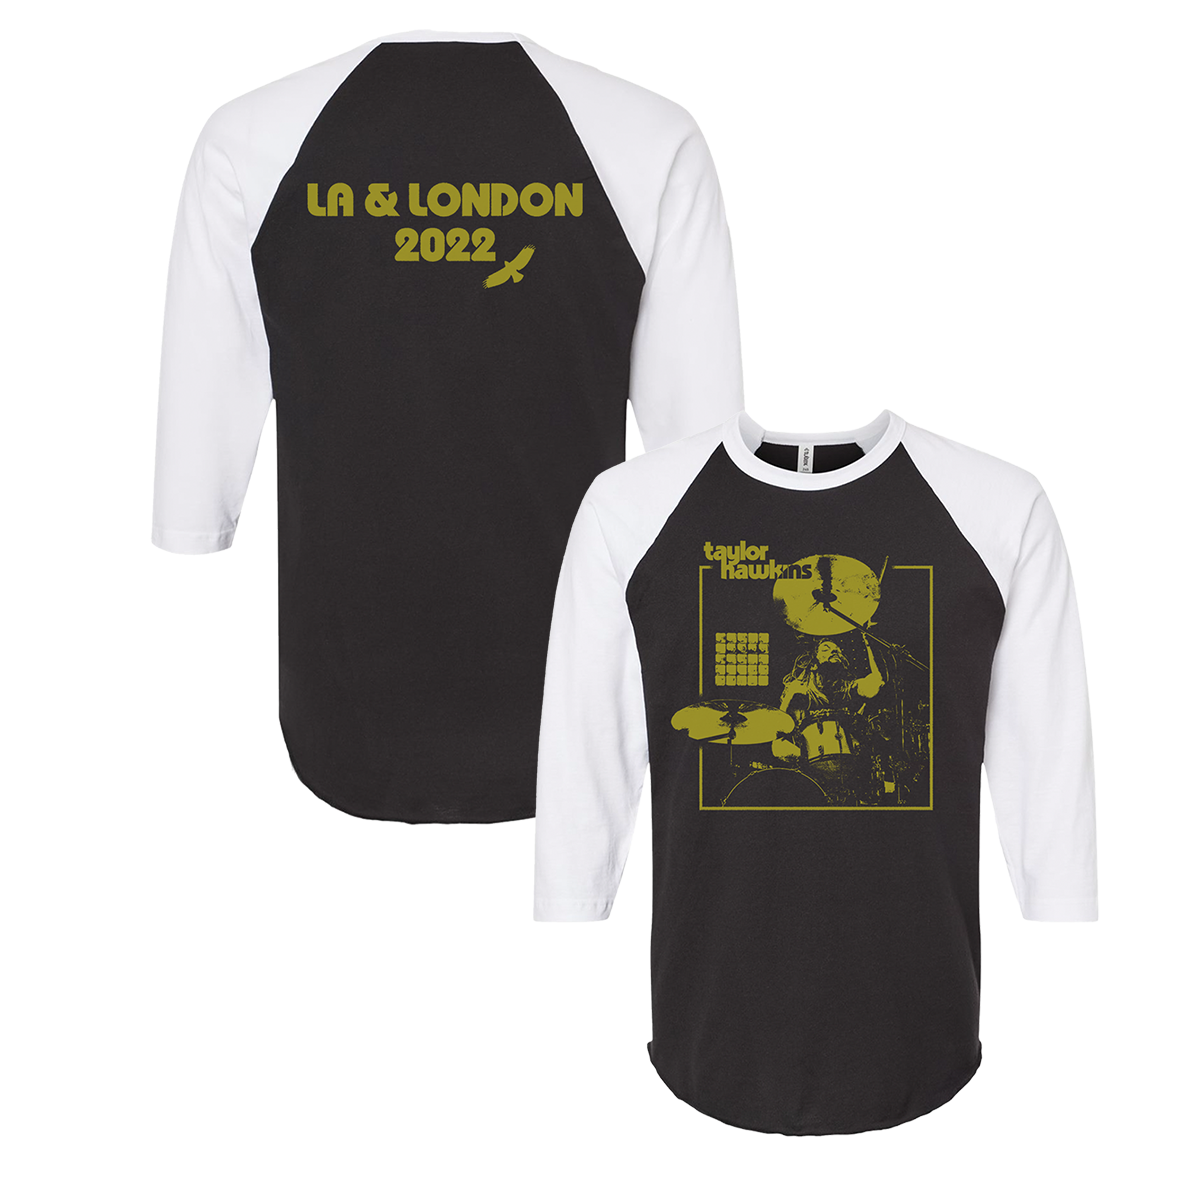 Taylor Hawkins Tribute Concert Raglan - Benefitting Music Cares (USA) and Music Support (UK)-Foo Fighters